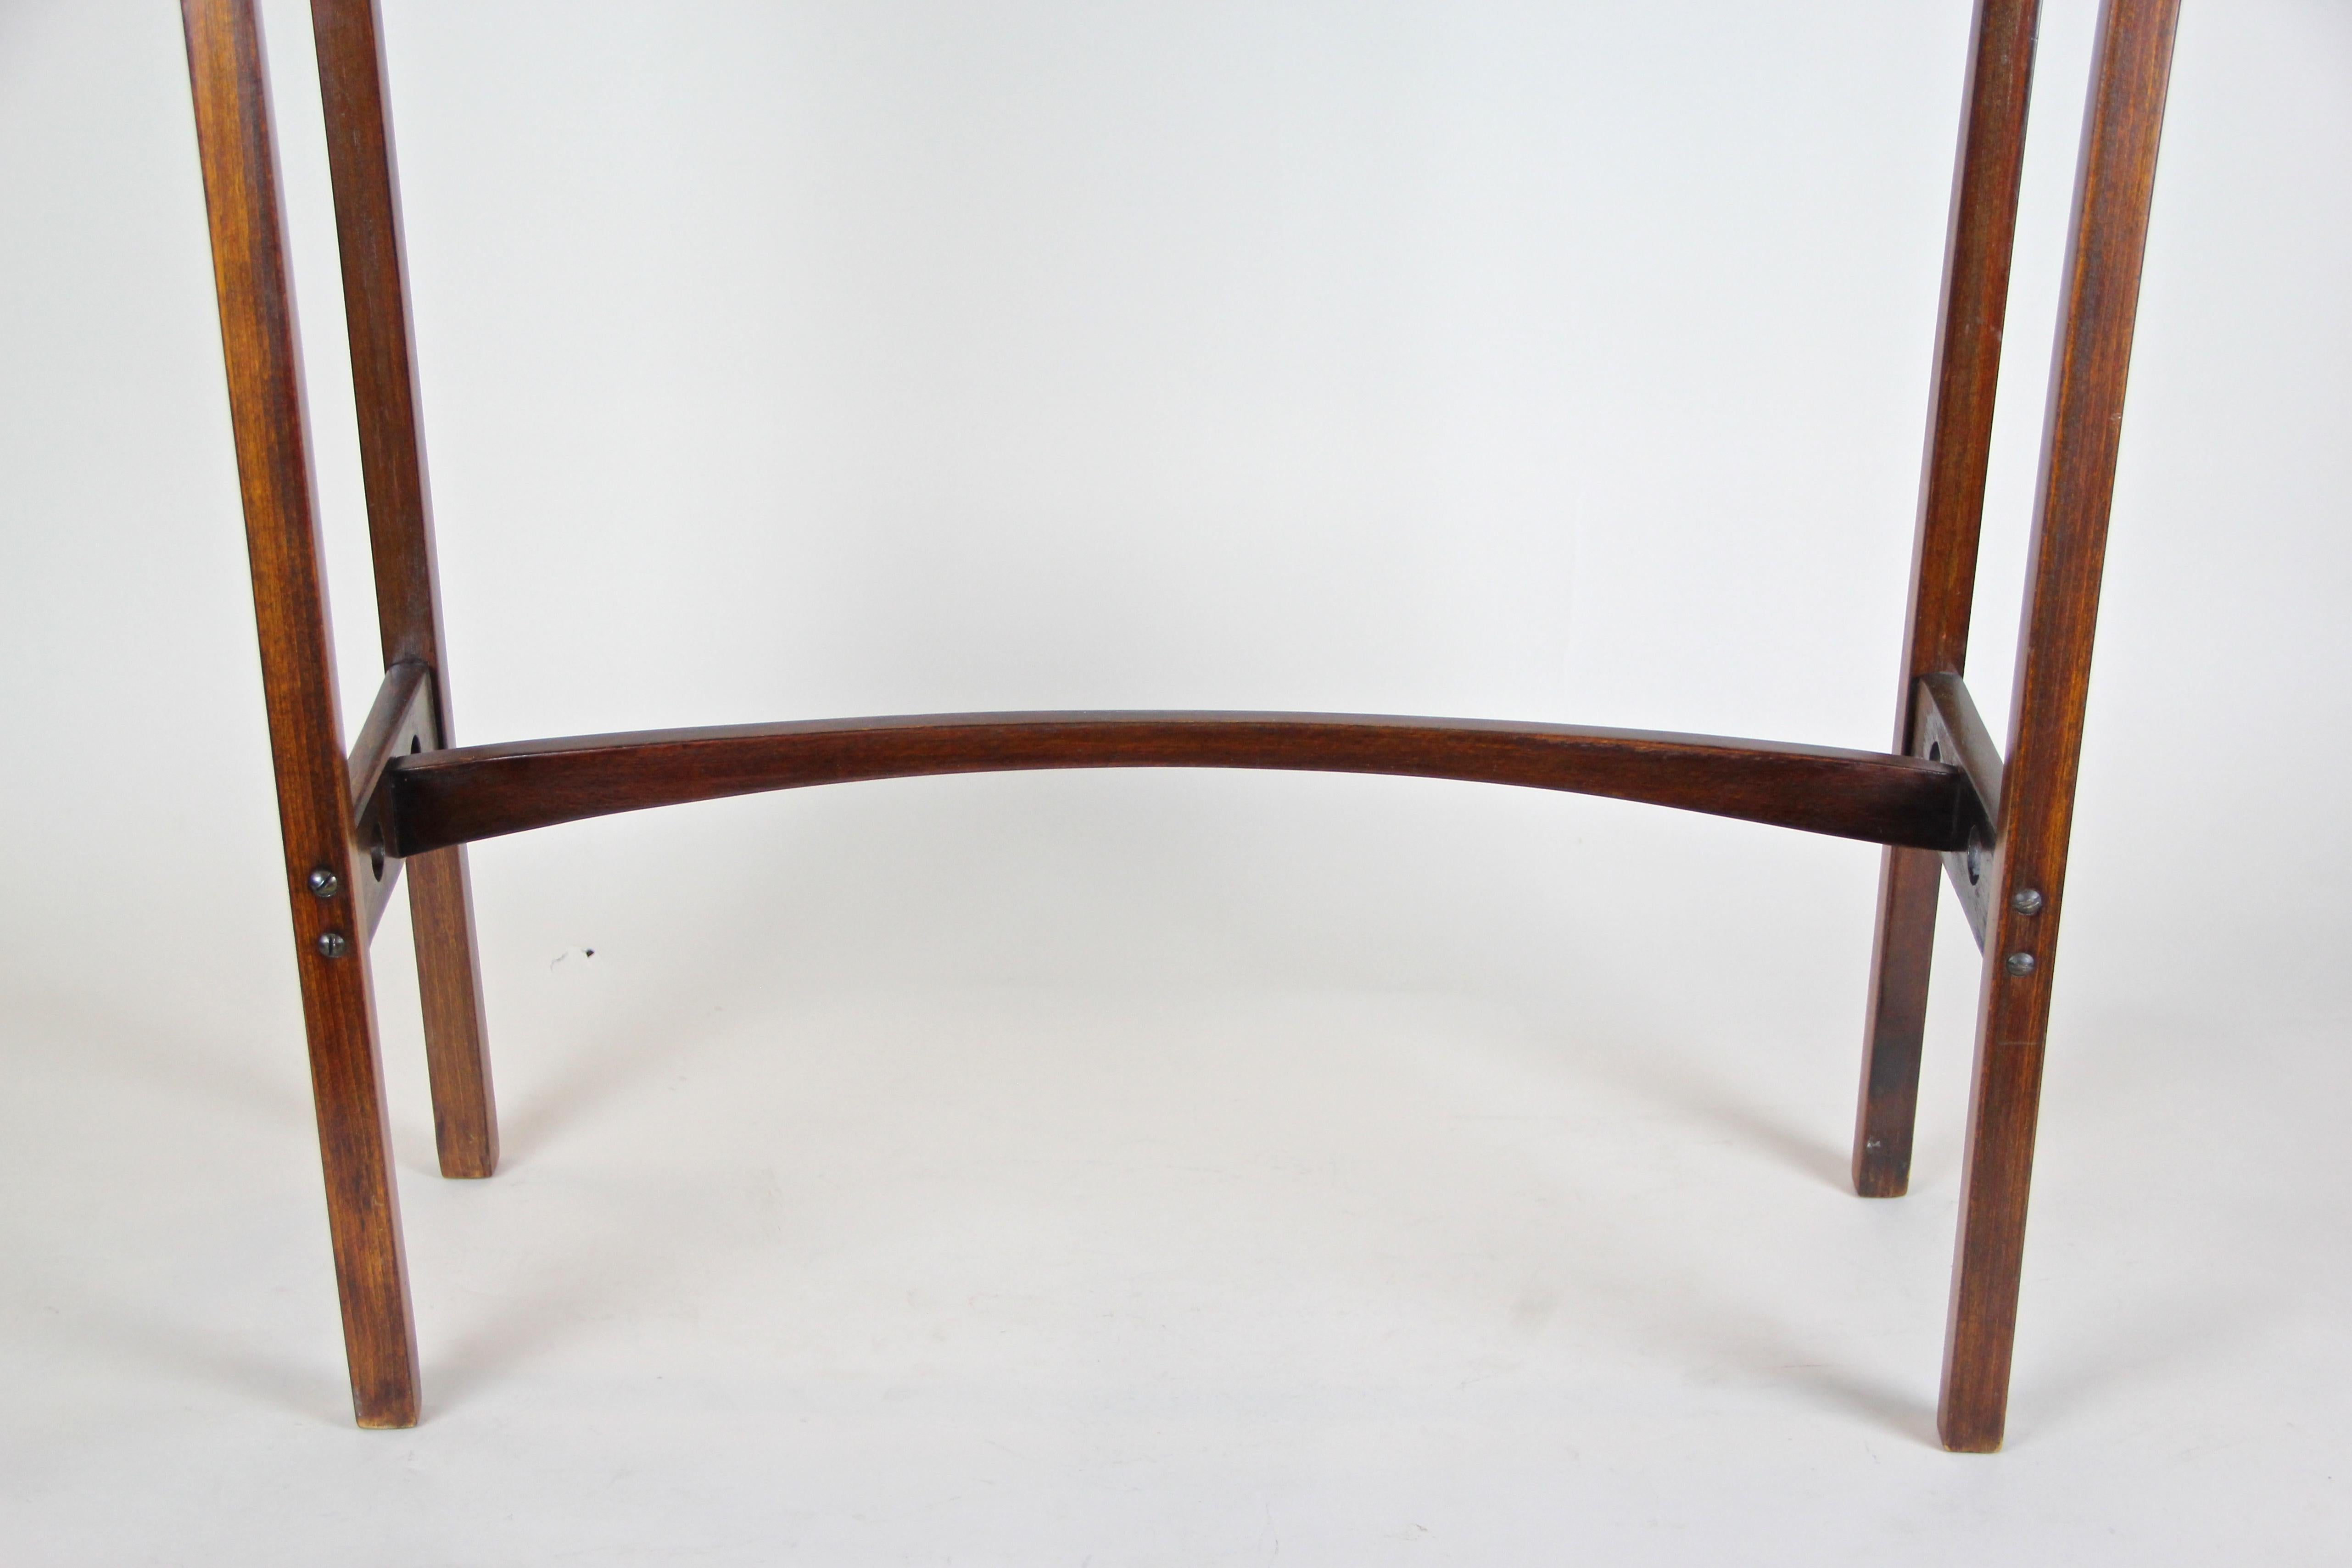 Beech Bentwood Plant Stand or Flower Tub Mod. No. 1 by Thonet, Austria, circa 1915